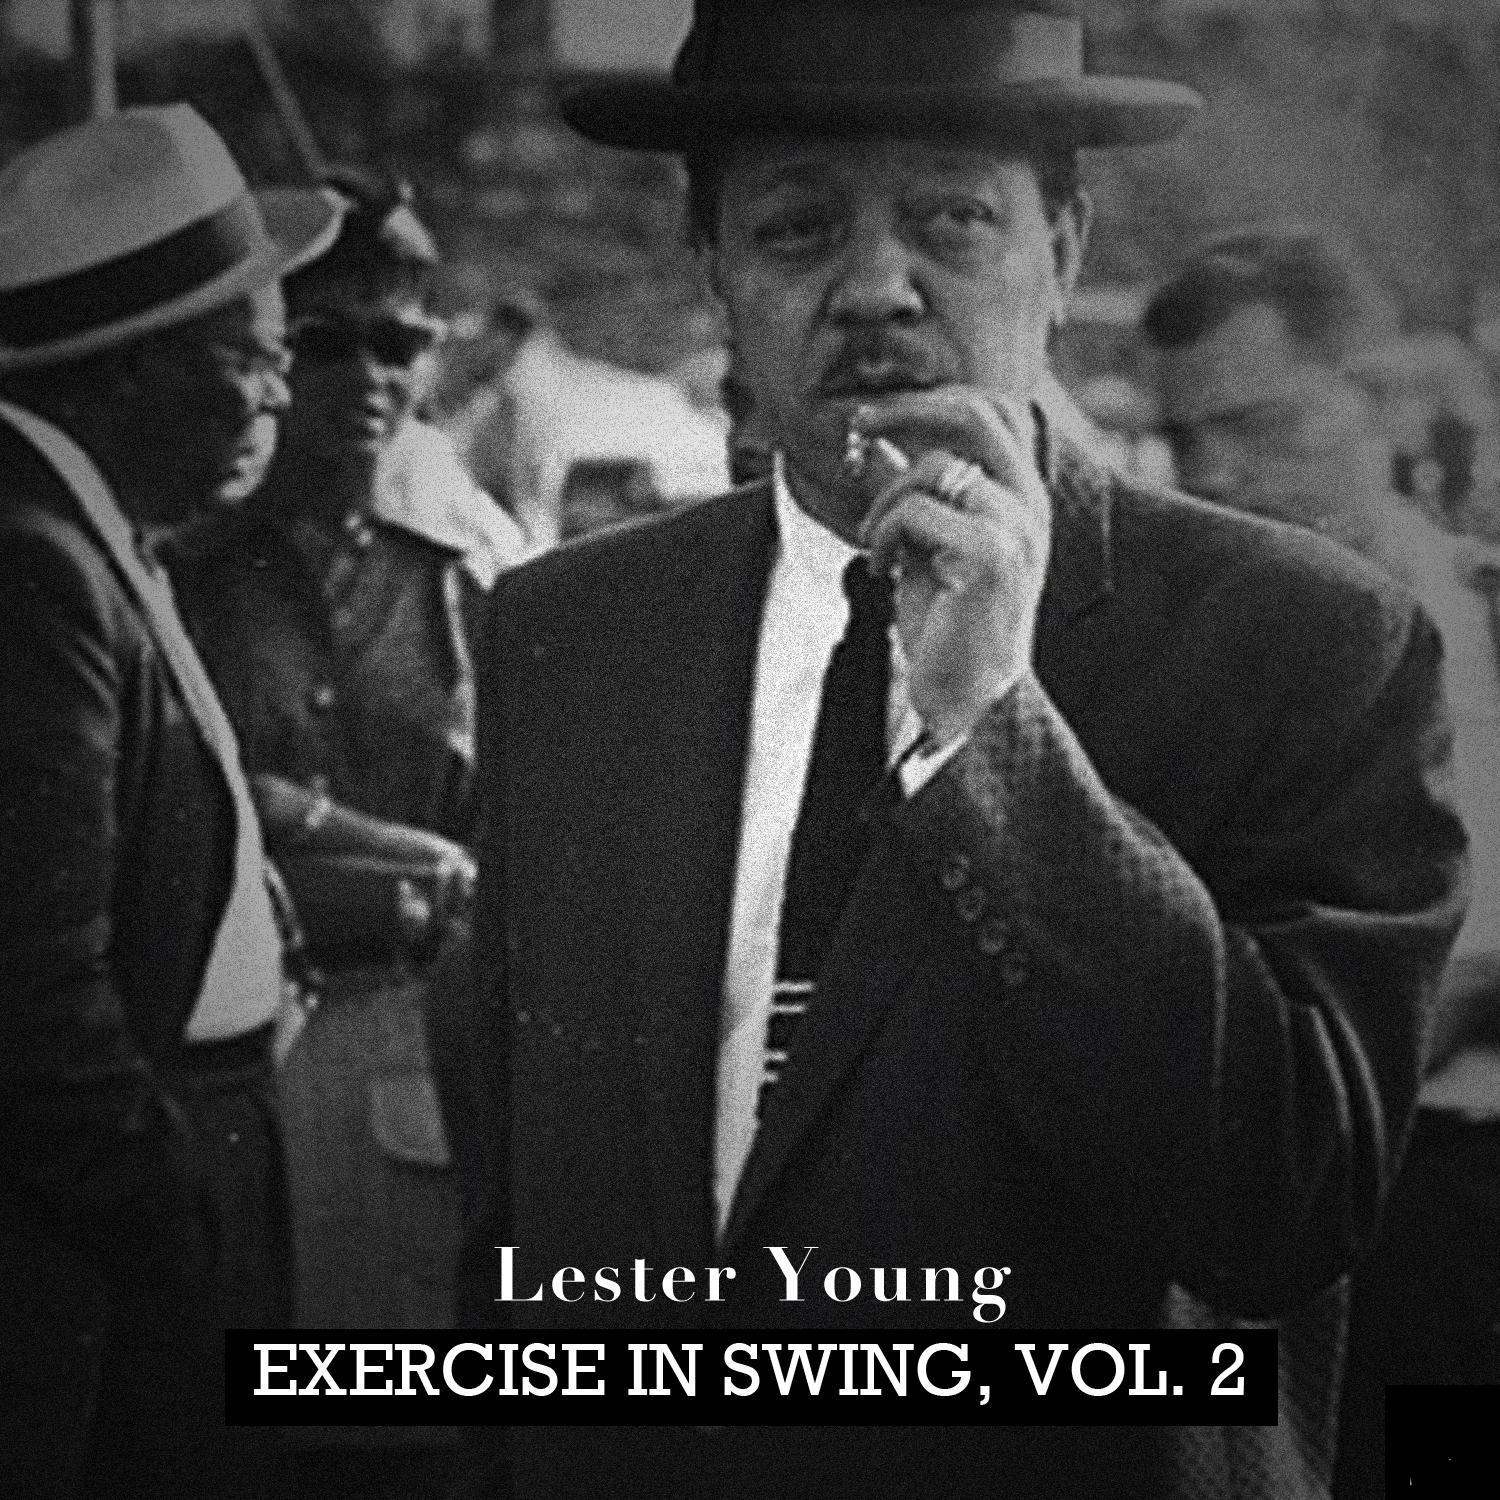 Exercise in Swing, Vol. 2